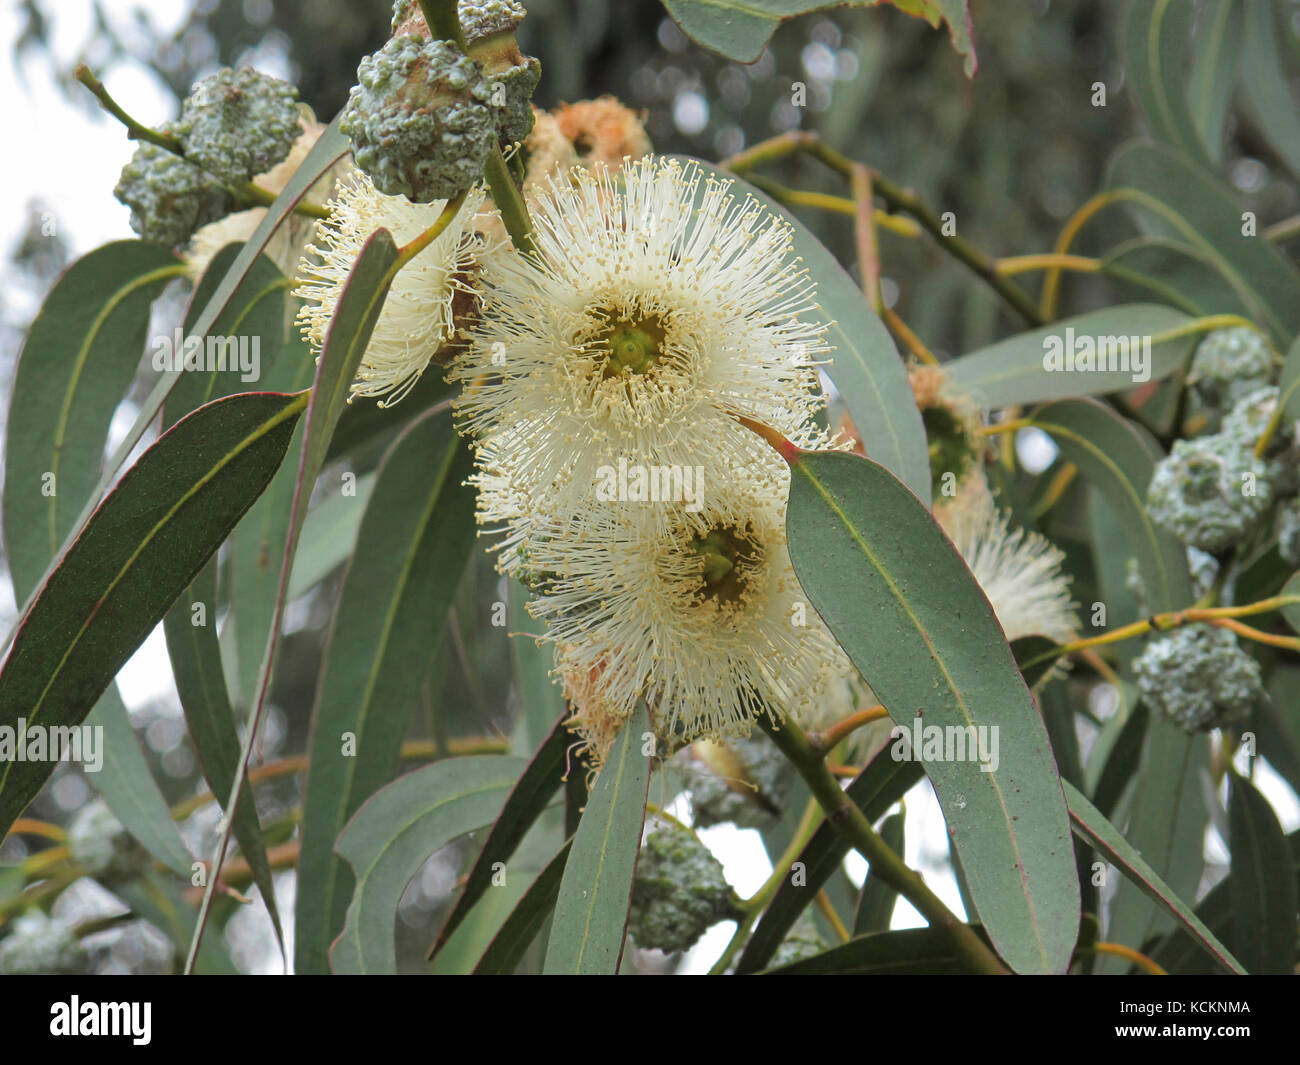 Tasmanian blue gum (Eucalyptus globulus), in flower. The tree grows to about 55 m, the lowest branches well above the ground. Stock Photo